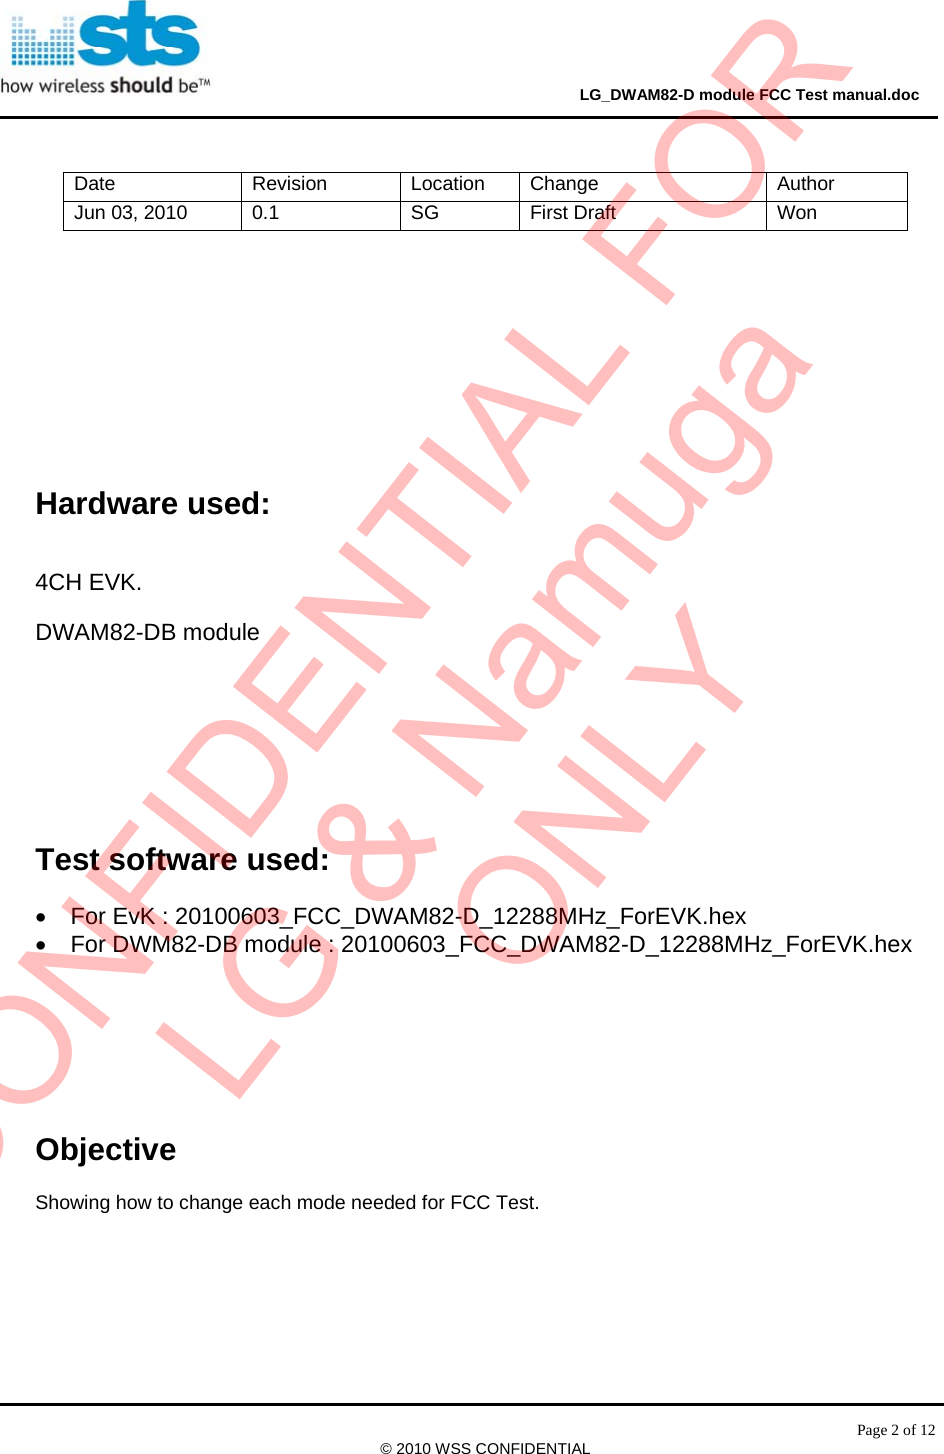                                                                                     LG_DWAM82-D module FCC Test manual.doc Page 2 of 12 © 2010 WSS CONFIDENTIAL        Hardware used: 4CH EVK. DWAM82-DB module   Test software used:  •  For EvK : 20100603_FCC_DWAM82-D_12288MHz_ForEVK.hex •  For DWM82-DB module : 20100603_FCC_DWAM82-D_12288MHz_ForEVK.hex     Objective  Showing how to change each mode needed for FCC Test.     Date Revision Location Change  Author Jun 03, 2010  0.1  SG  First Draft  Won CONFIDENTIAL FORLG &amp; NamugaONLY